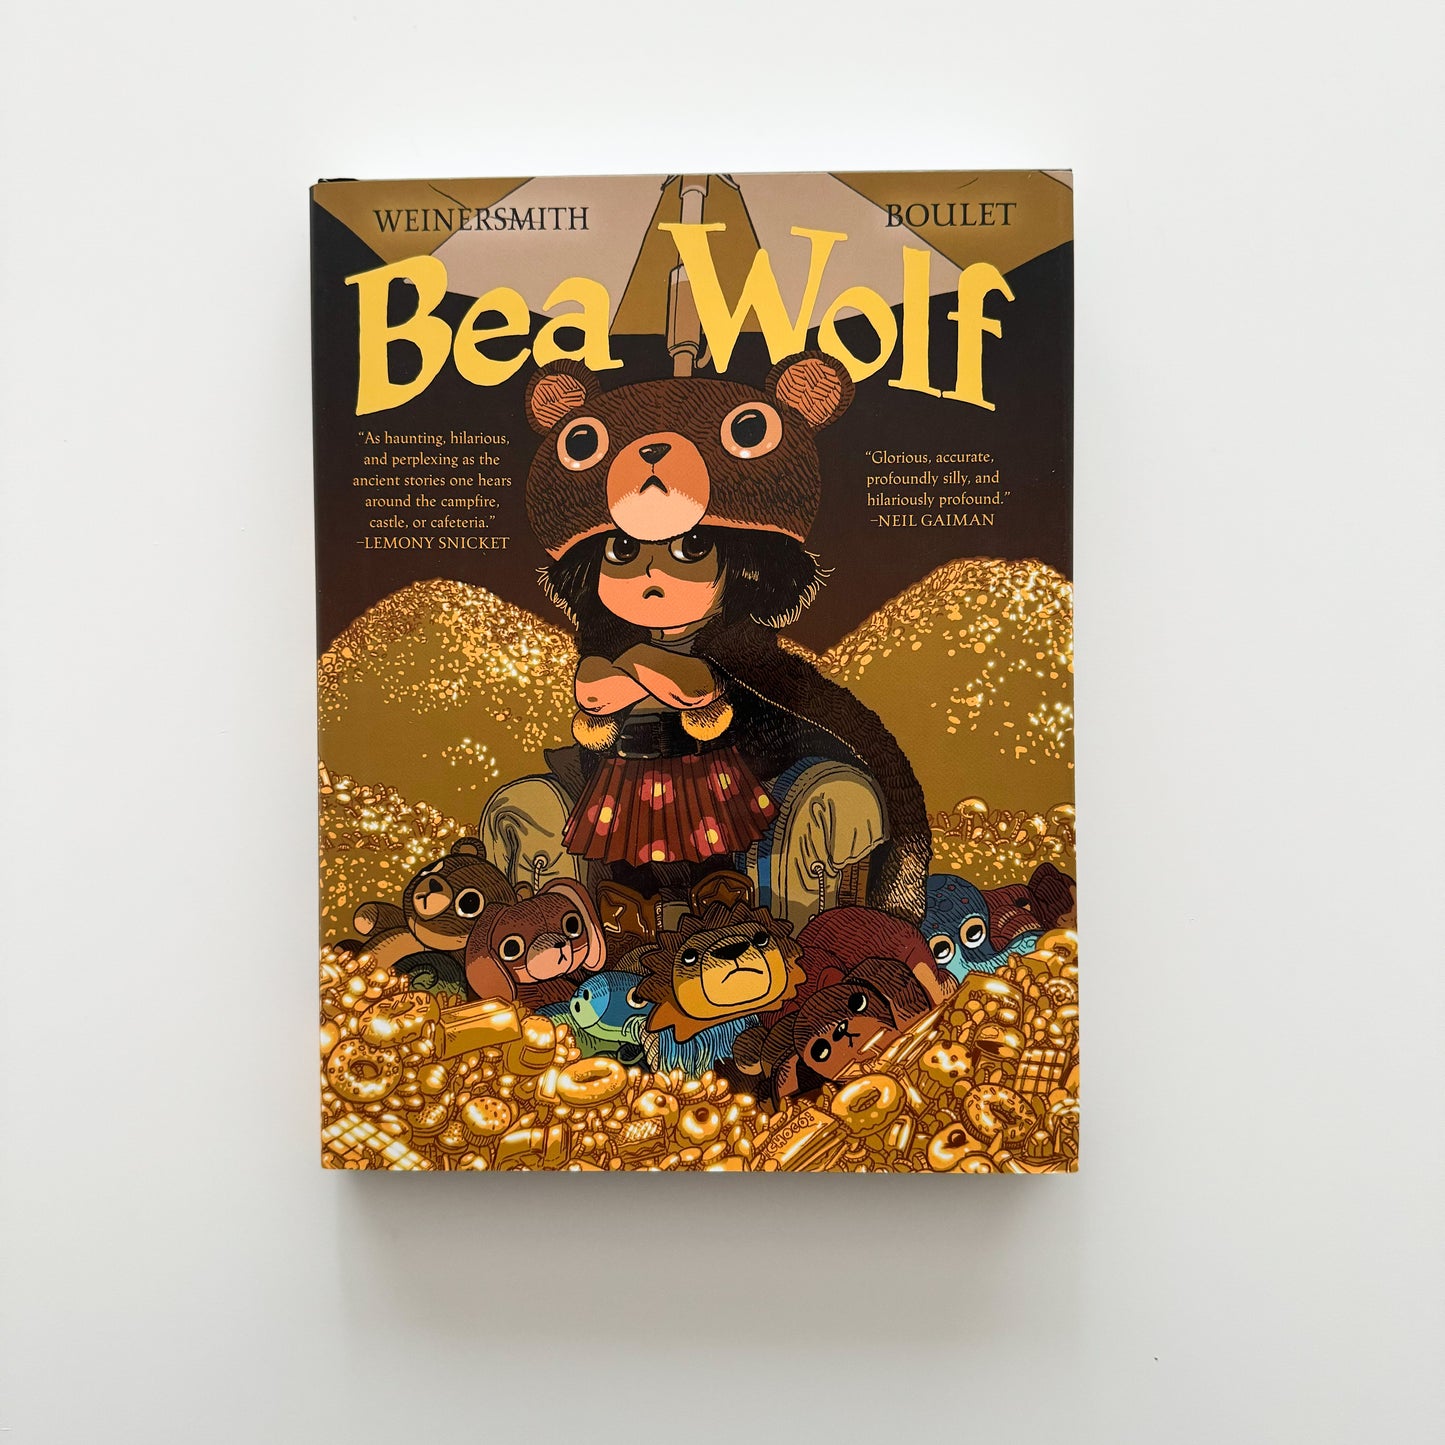 Bea Wolf: A Graphic Novel